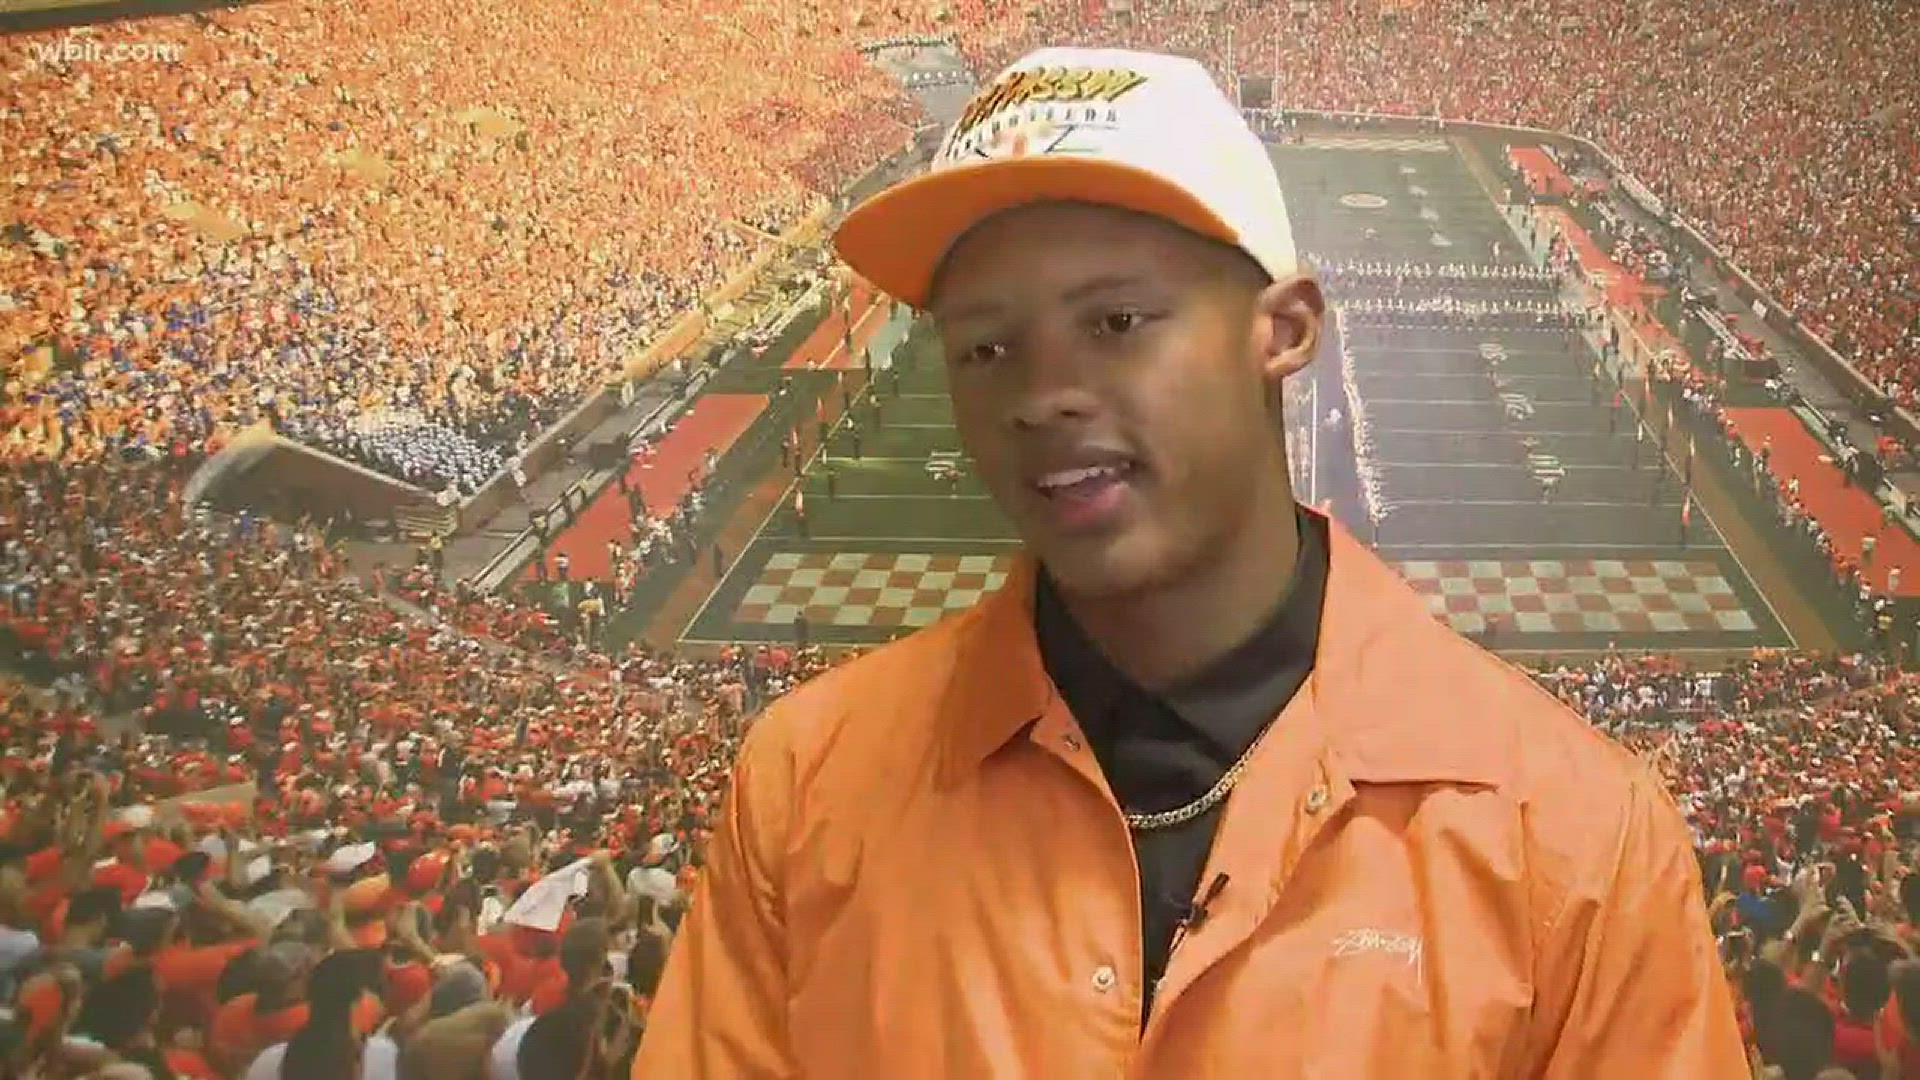 Midway through his first season in the NFL, Dobbs talked to us about how he's making the most of his life in the pros.